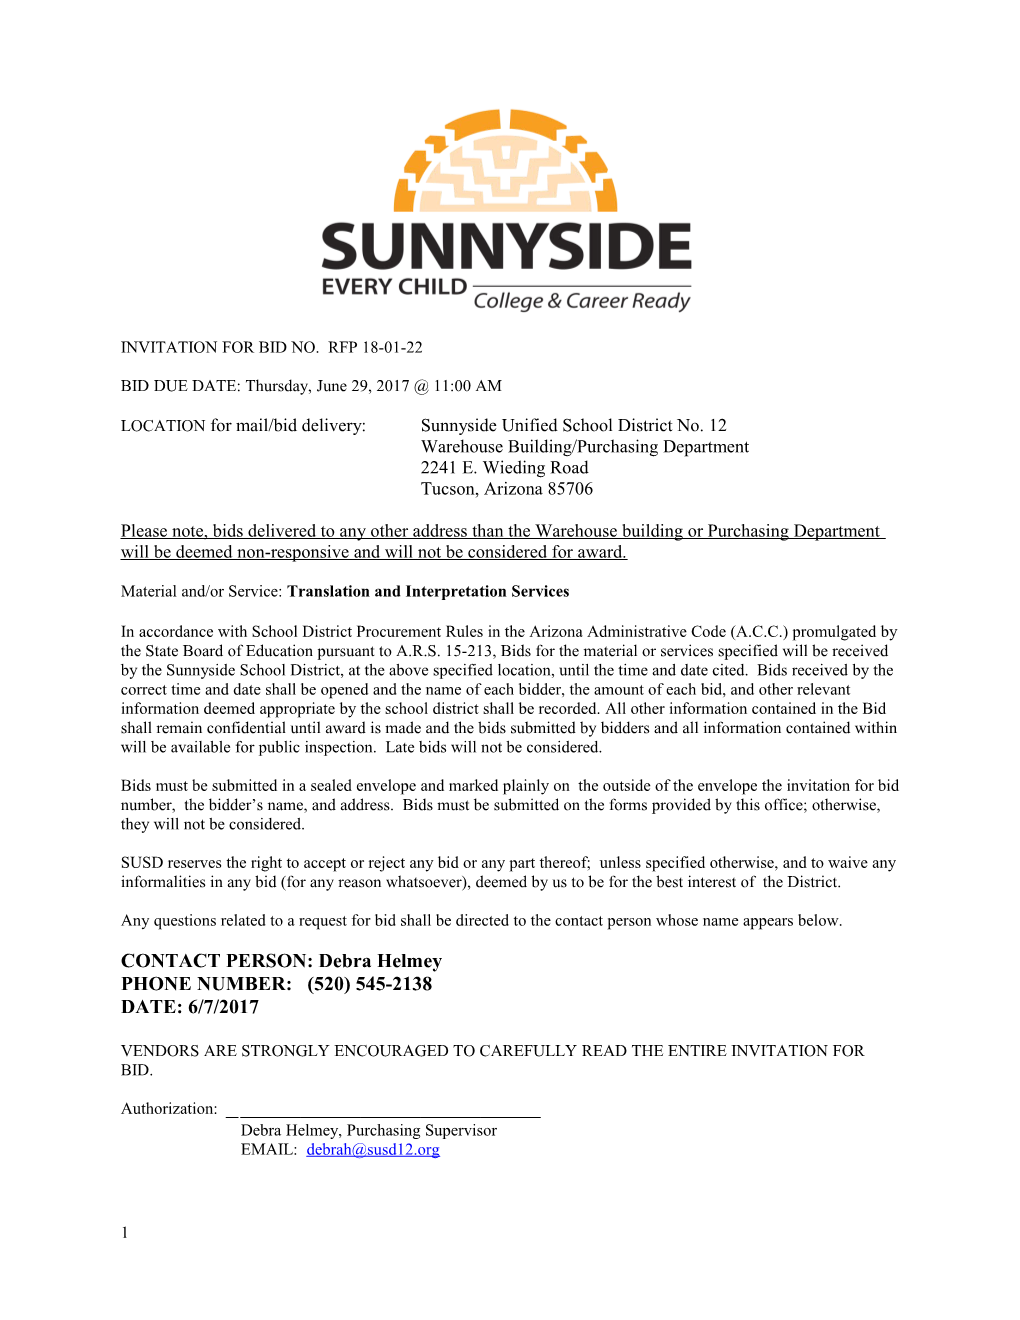 Sunnyside Unified School District No